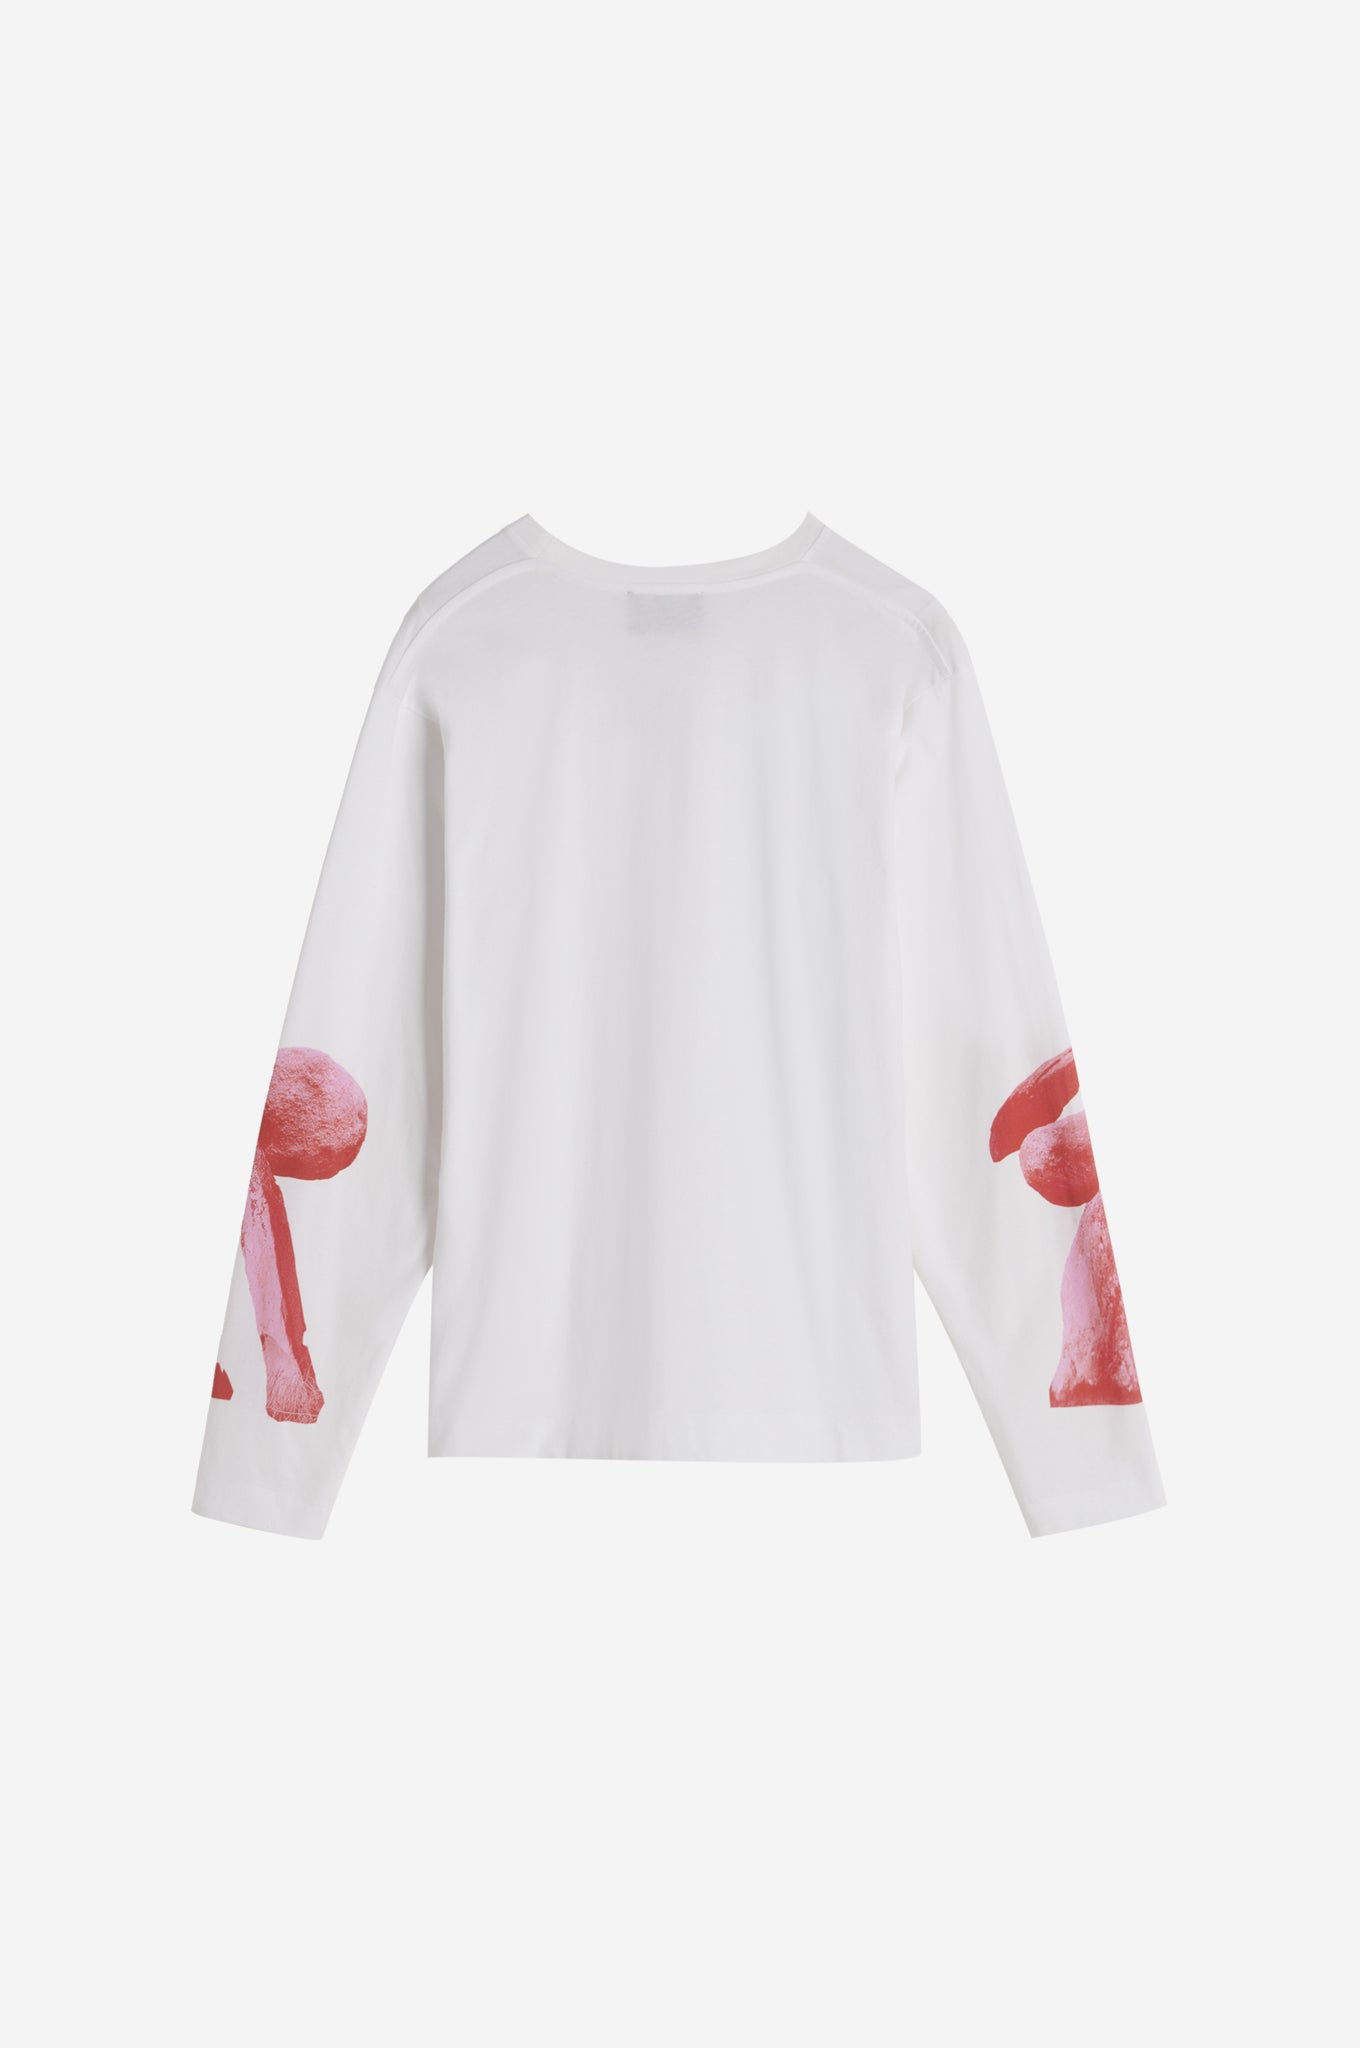 Graphic Project Long Sleeve T-Shirt - Stones